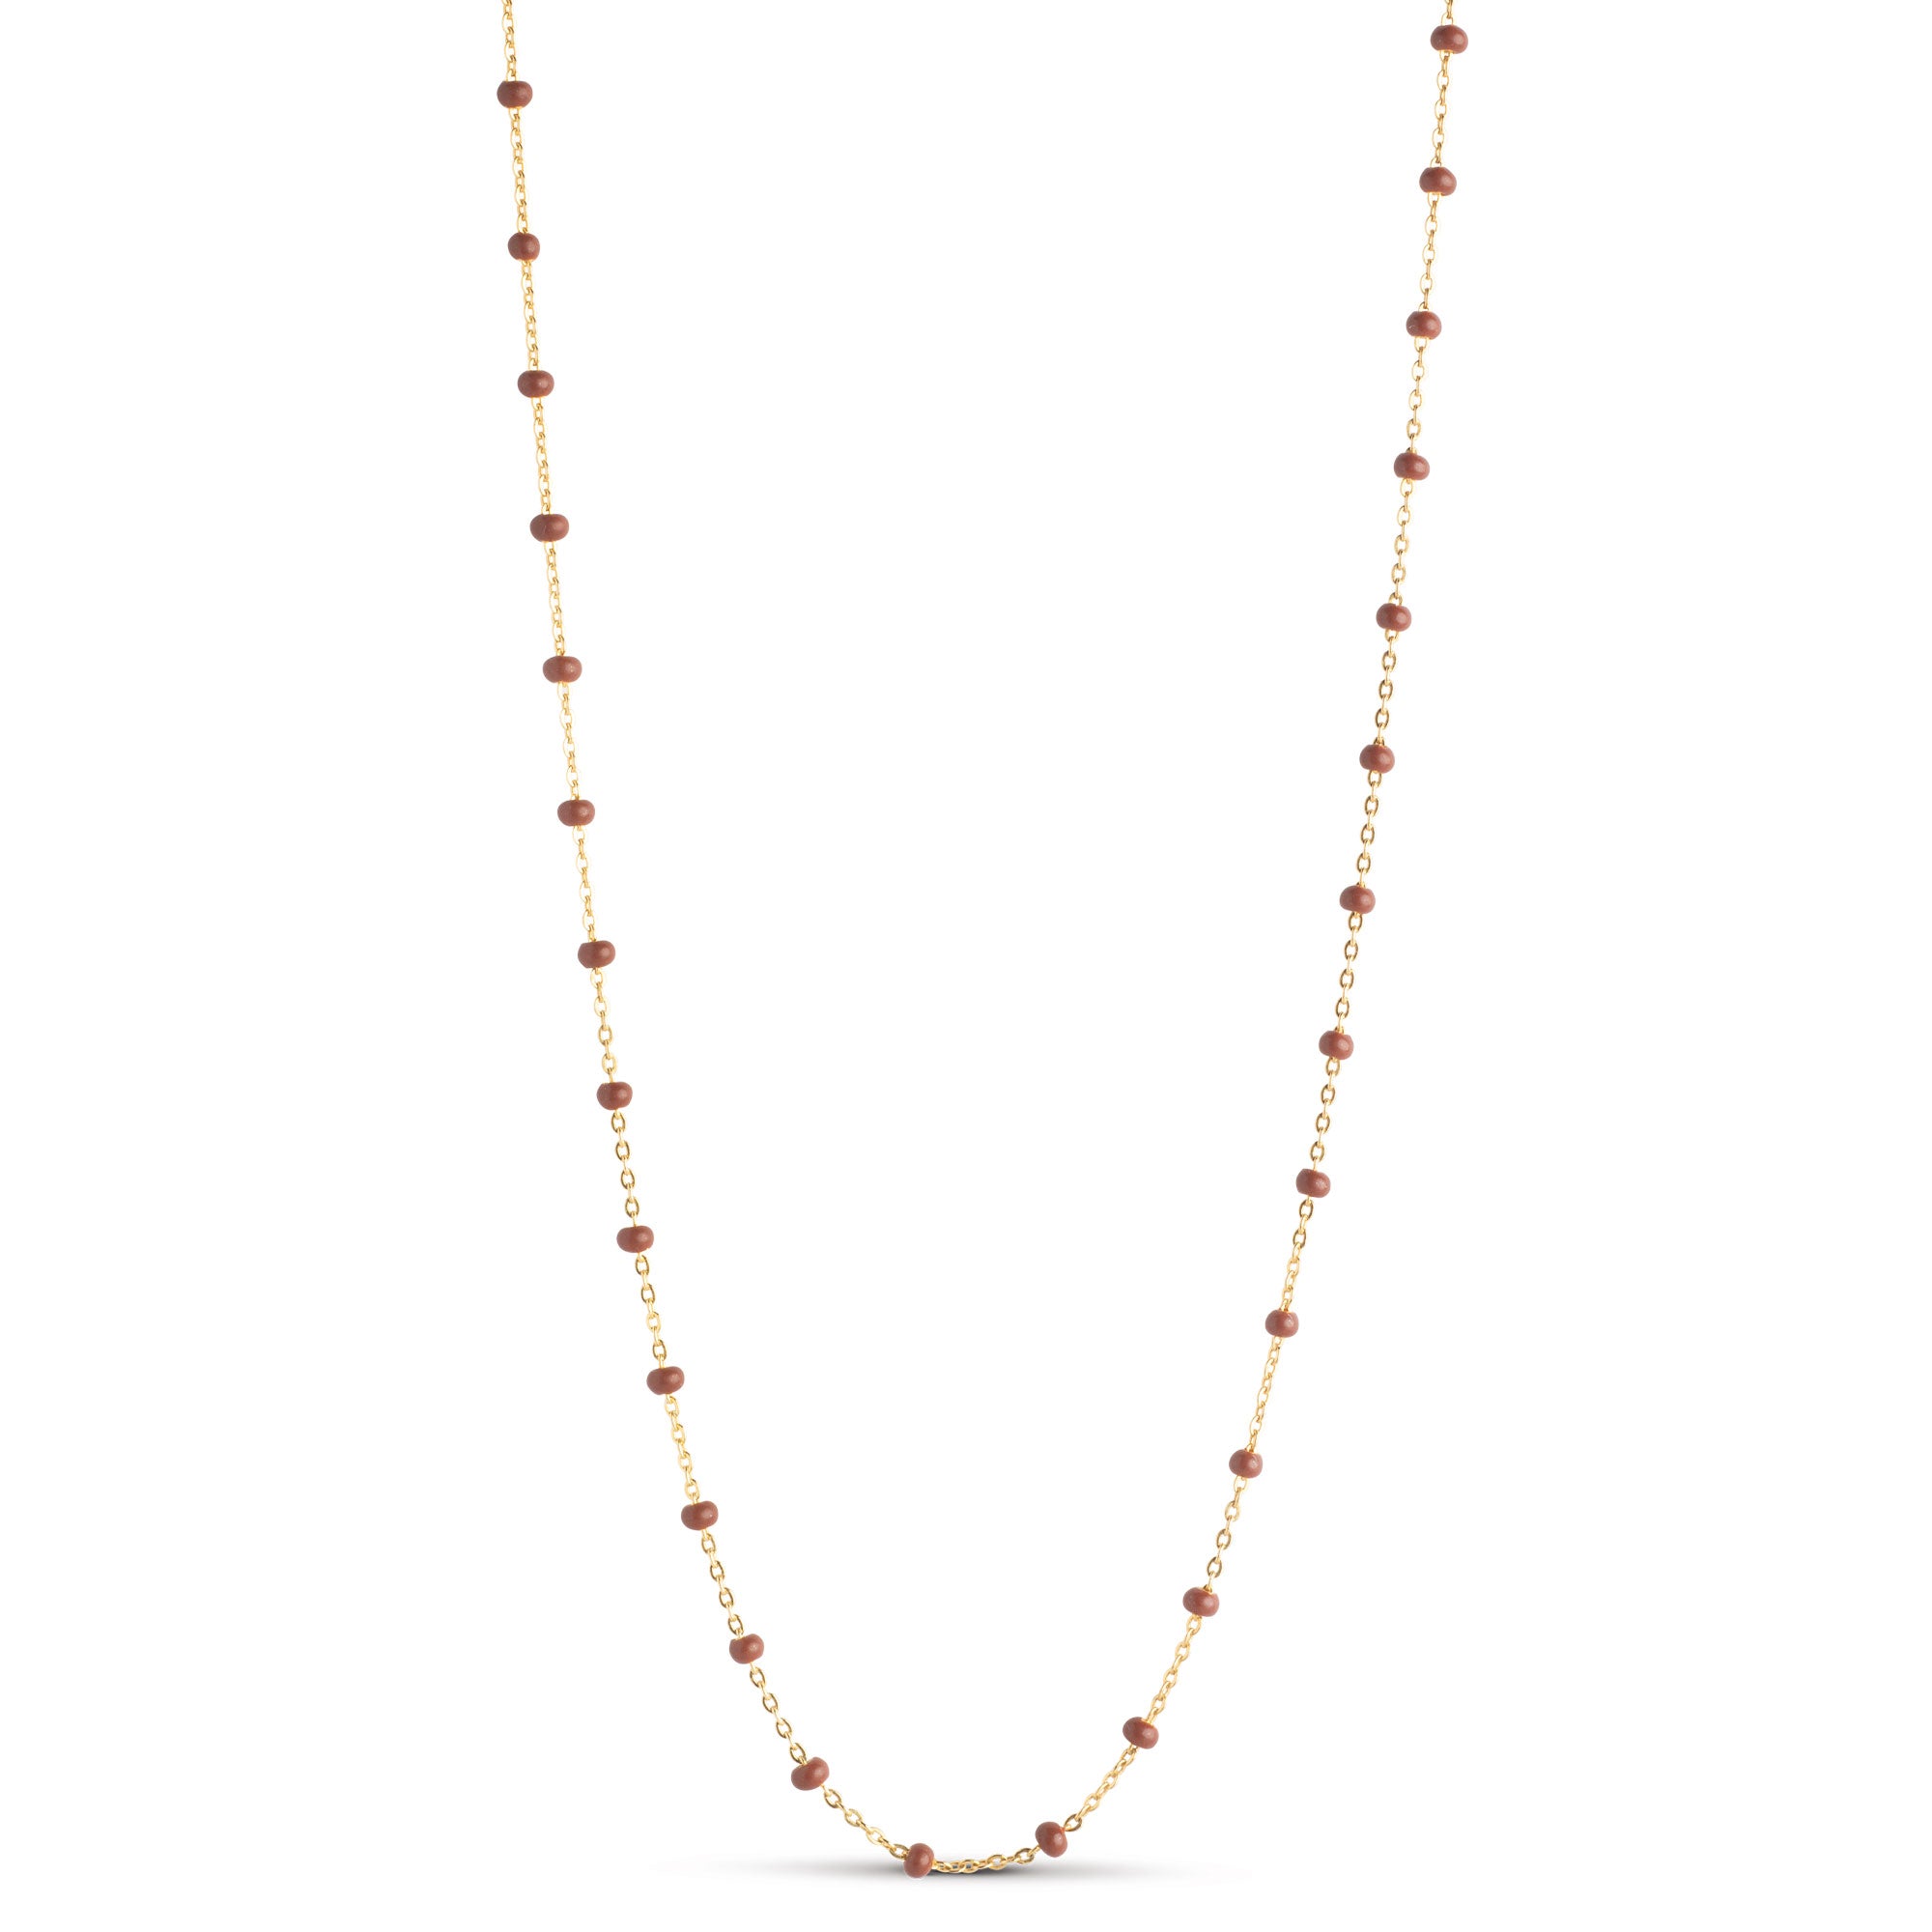 Prue Leith necklaces - Prue Leith launches jewellery collection with Lola  Rose